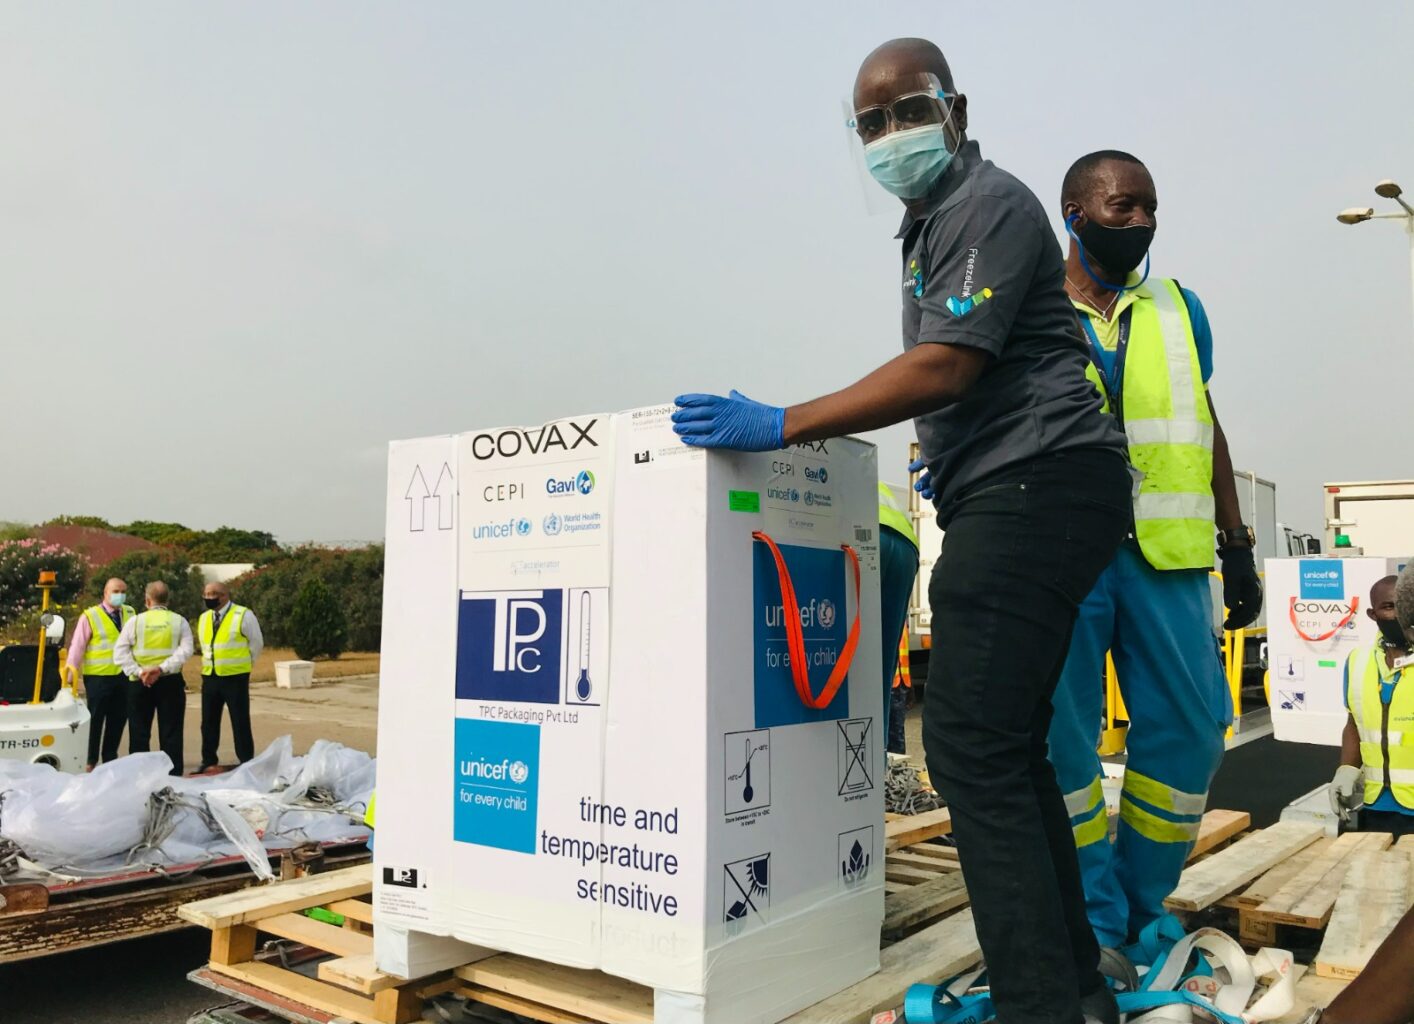 Photo 2: Owusu and team aide in delivering COVAX Vaccine in Ghana